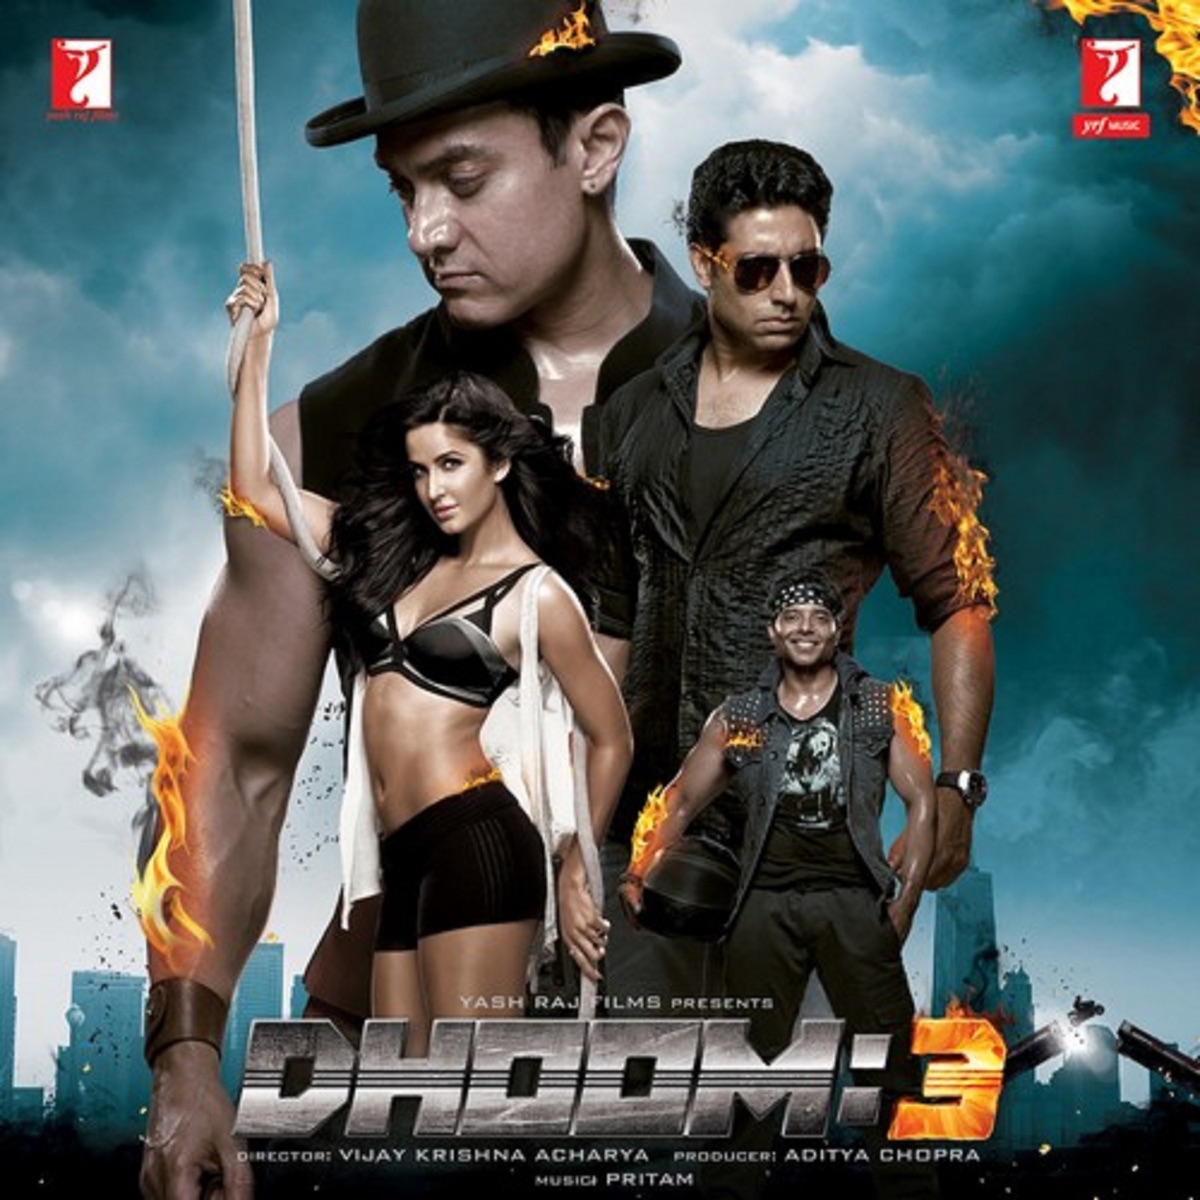 Dhoom:2 (Original Motion Picture Soundtrack) by Pritam on Apple Music